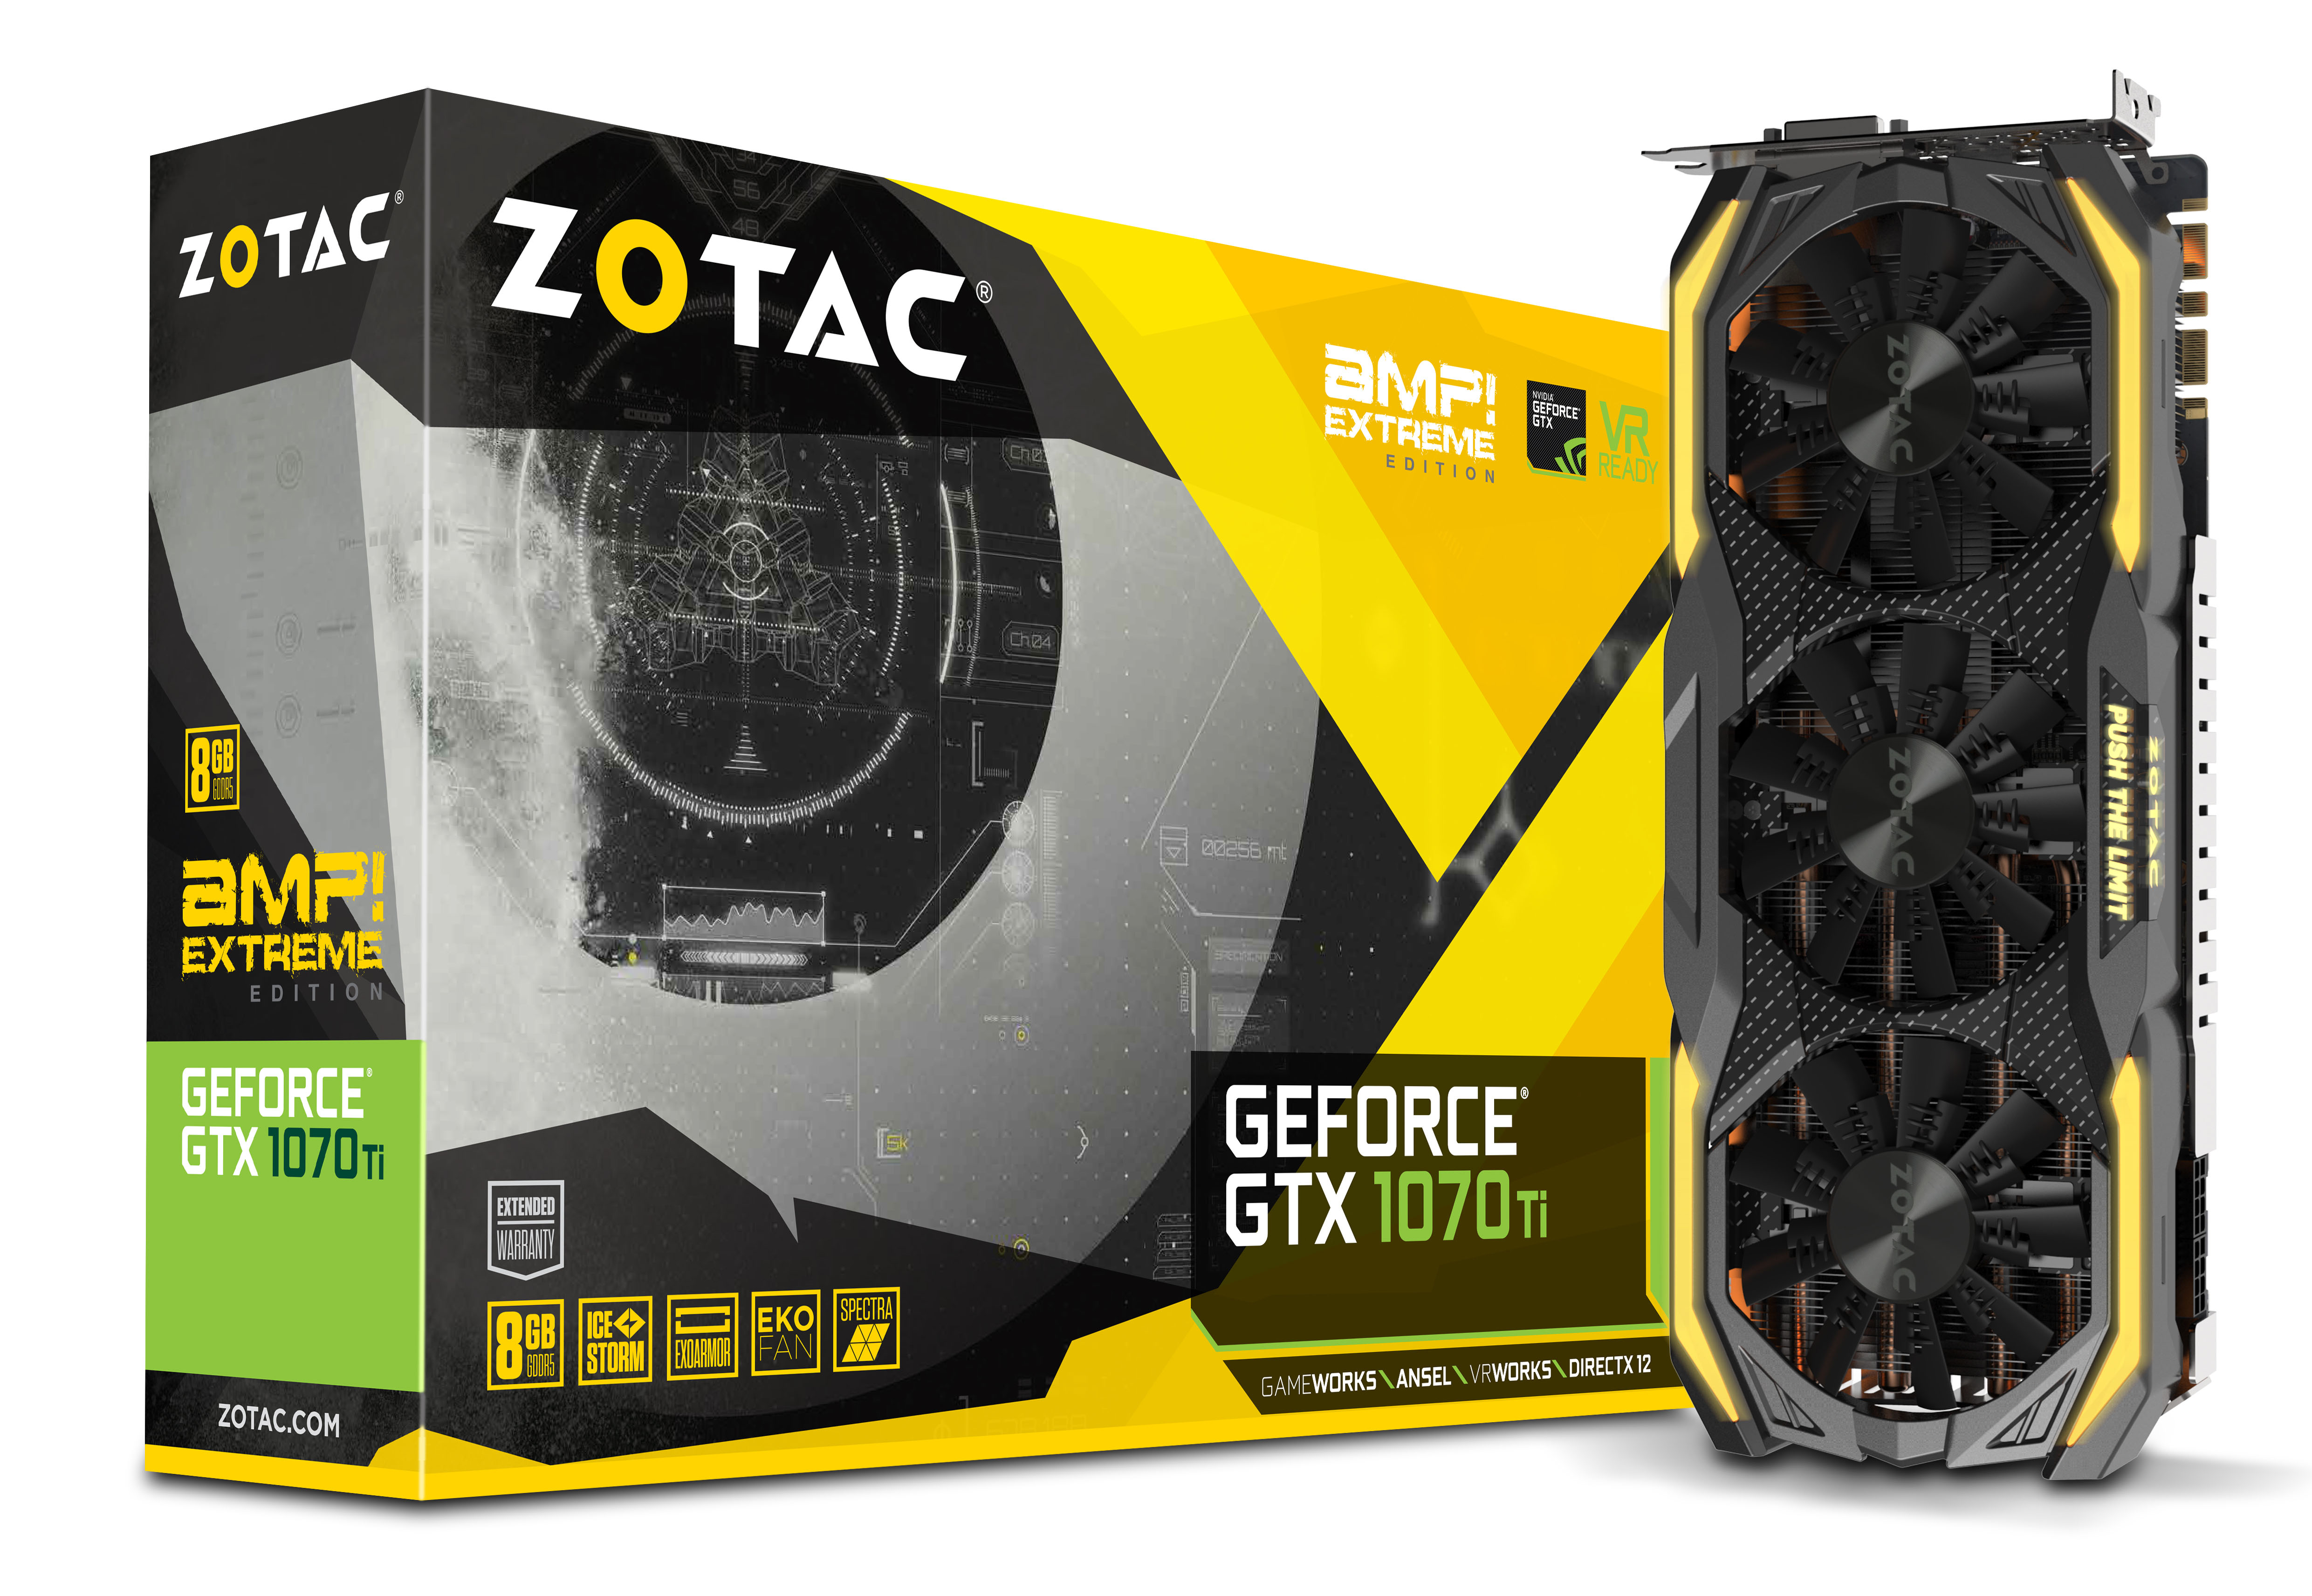 The GTX 1070Ti is official: Prices start at £419, custom-cooled